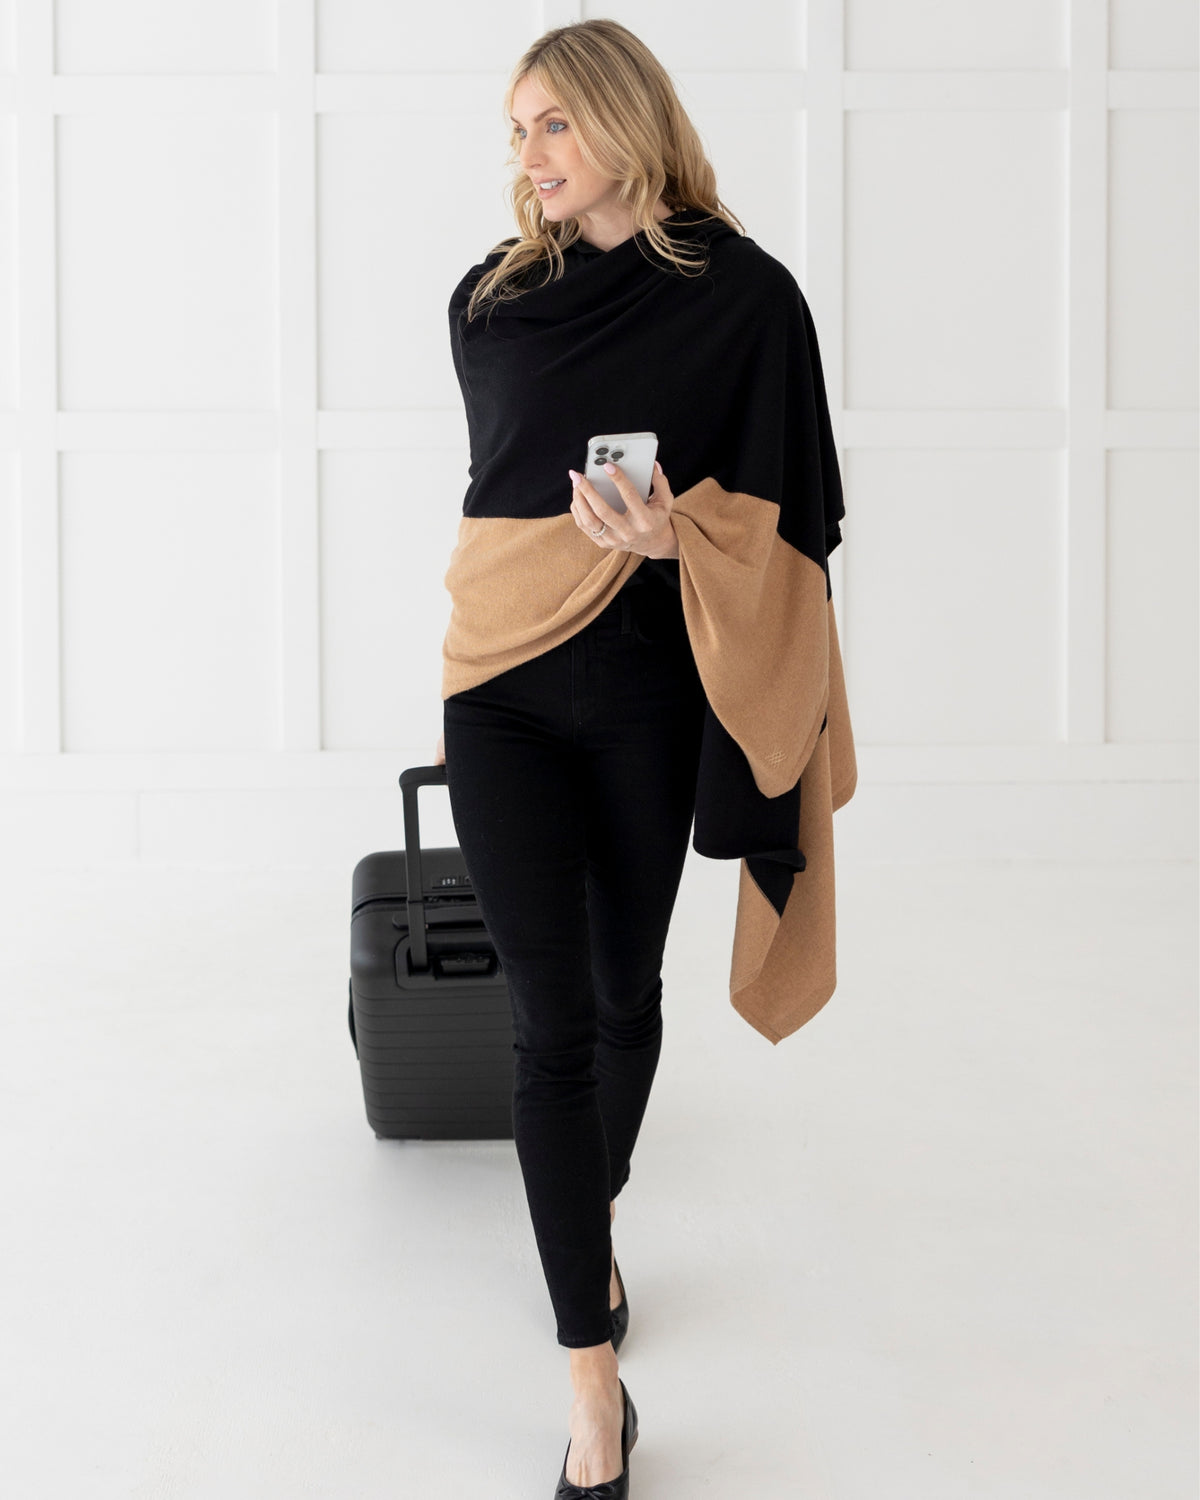 Cashmere Cotton Luxe Travel Scarf - Black and Camel Colorblock